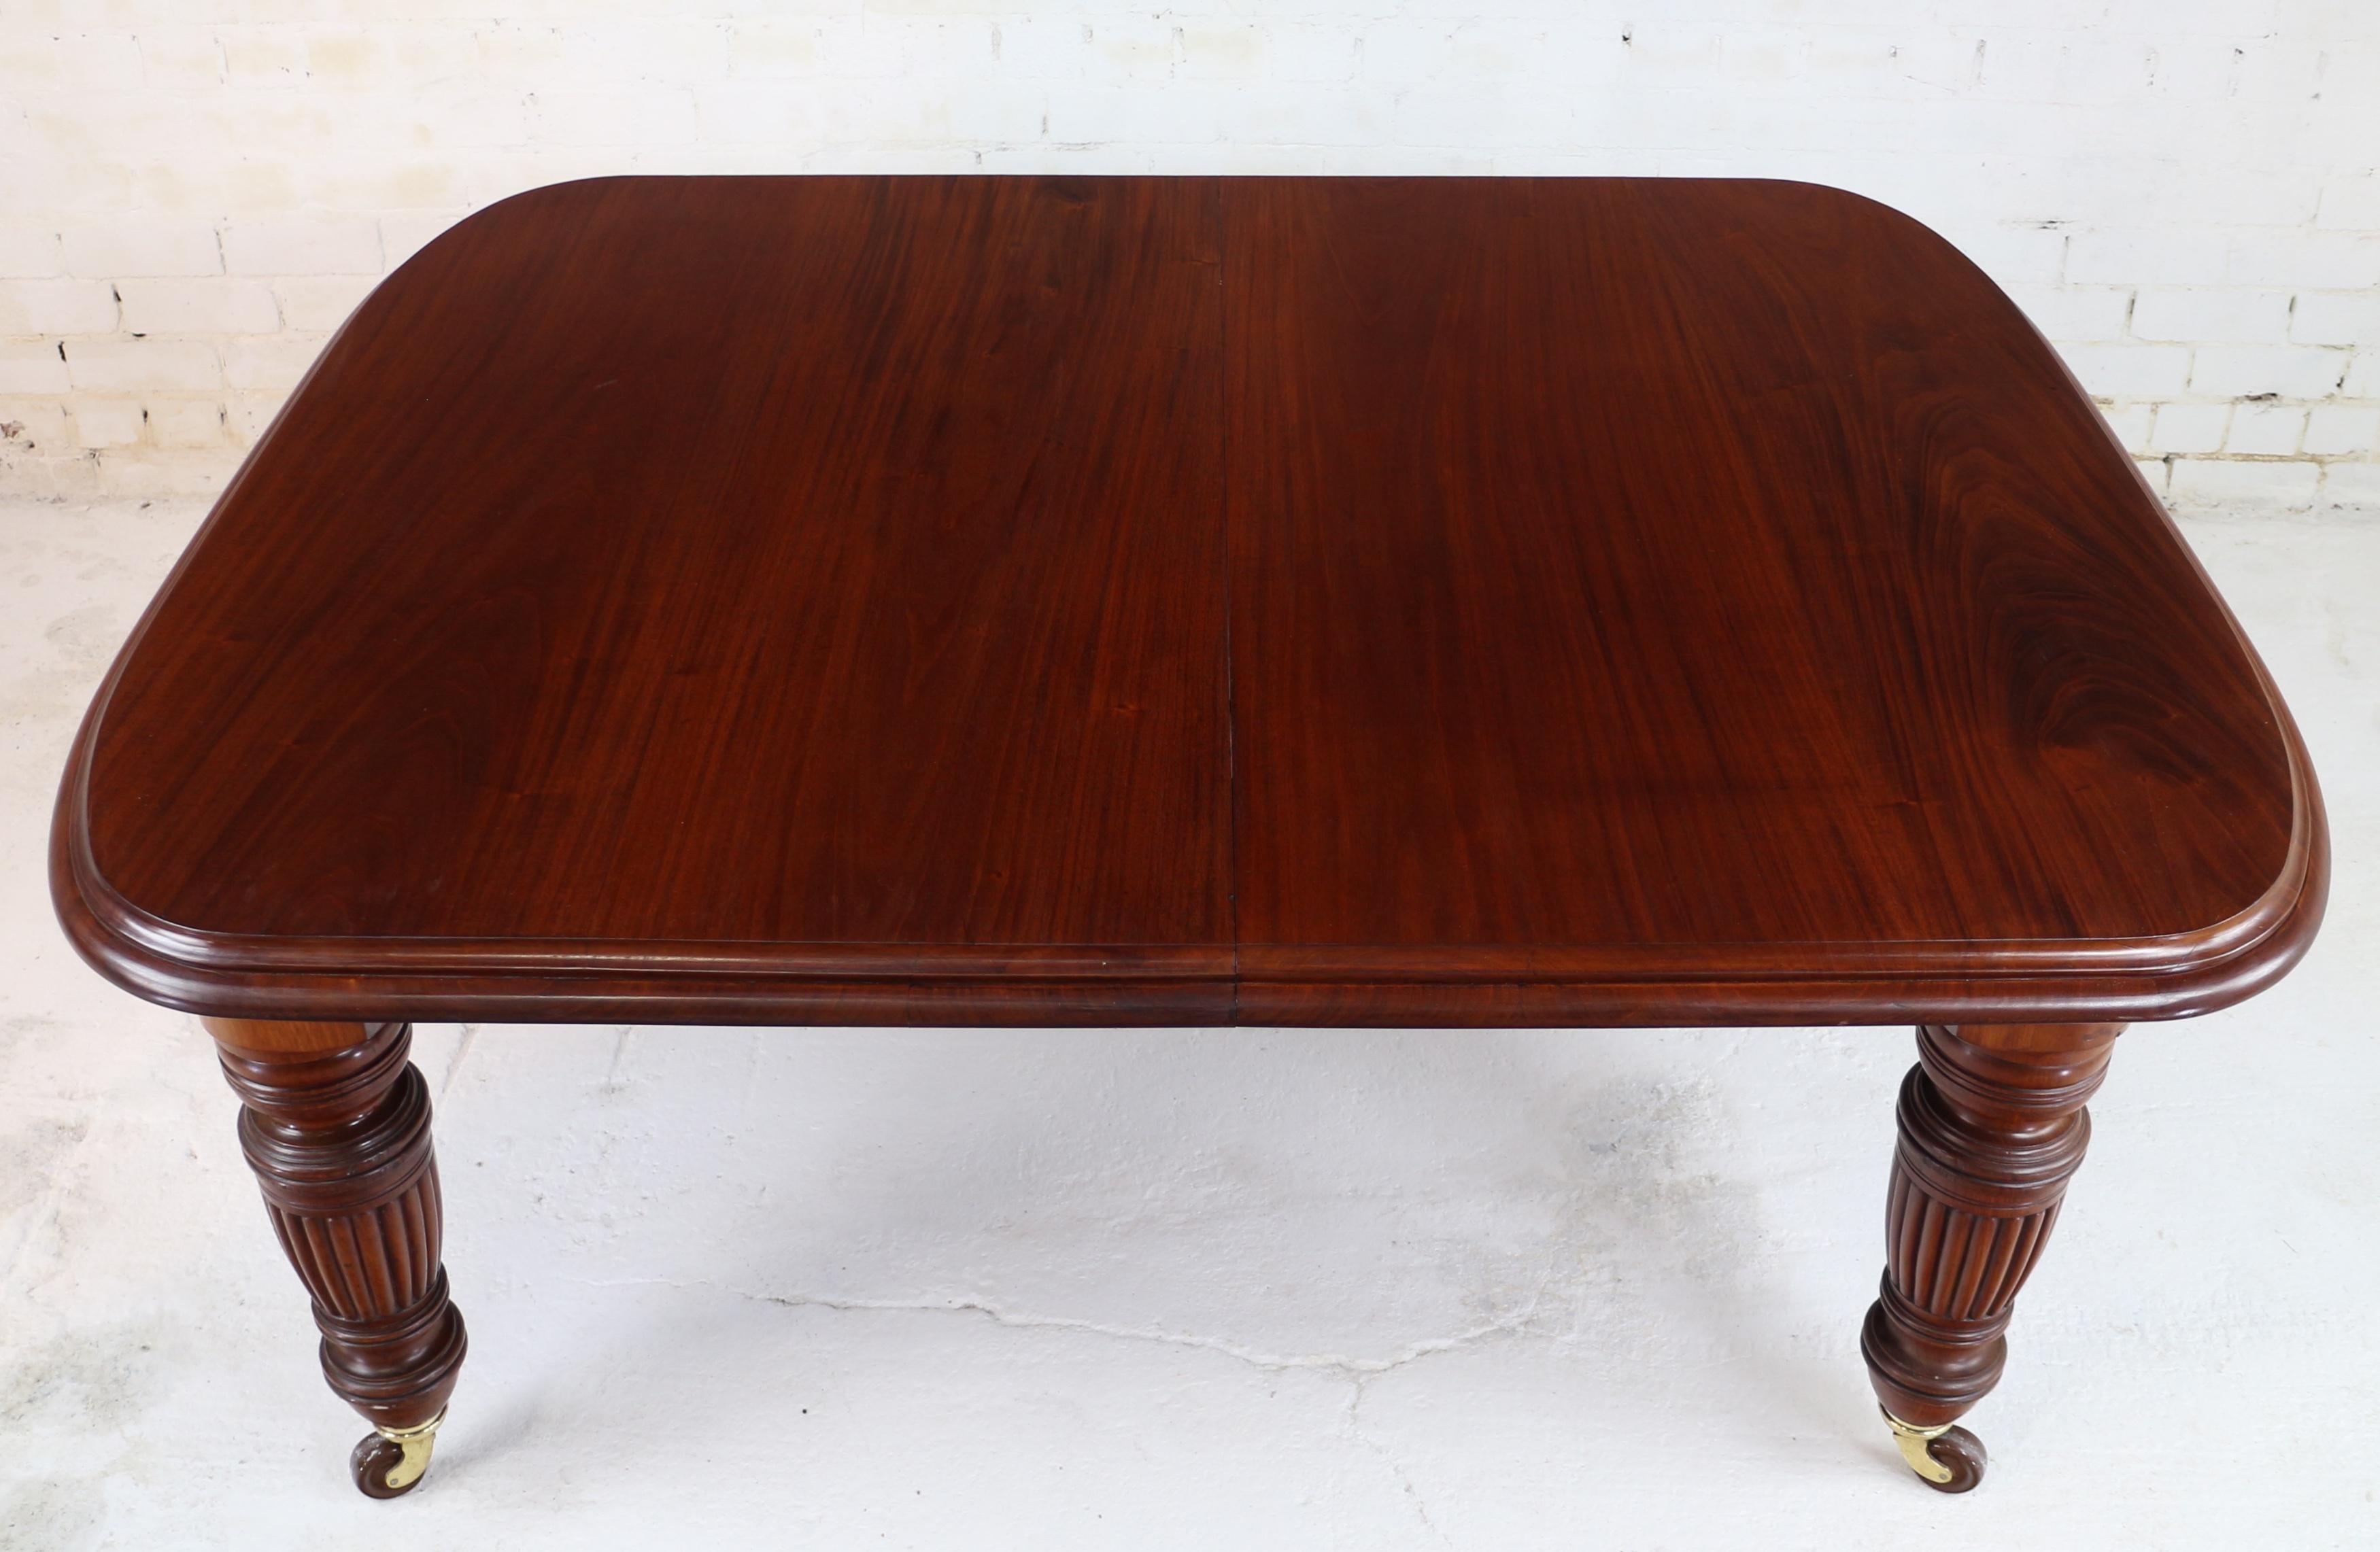 Antique English Victorian Mahogany Extending Dining Table & 3 Leaves, Seats 12 For Sale 8